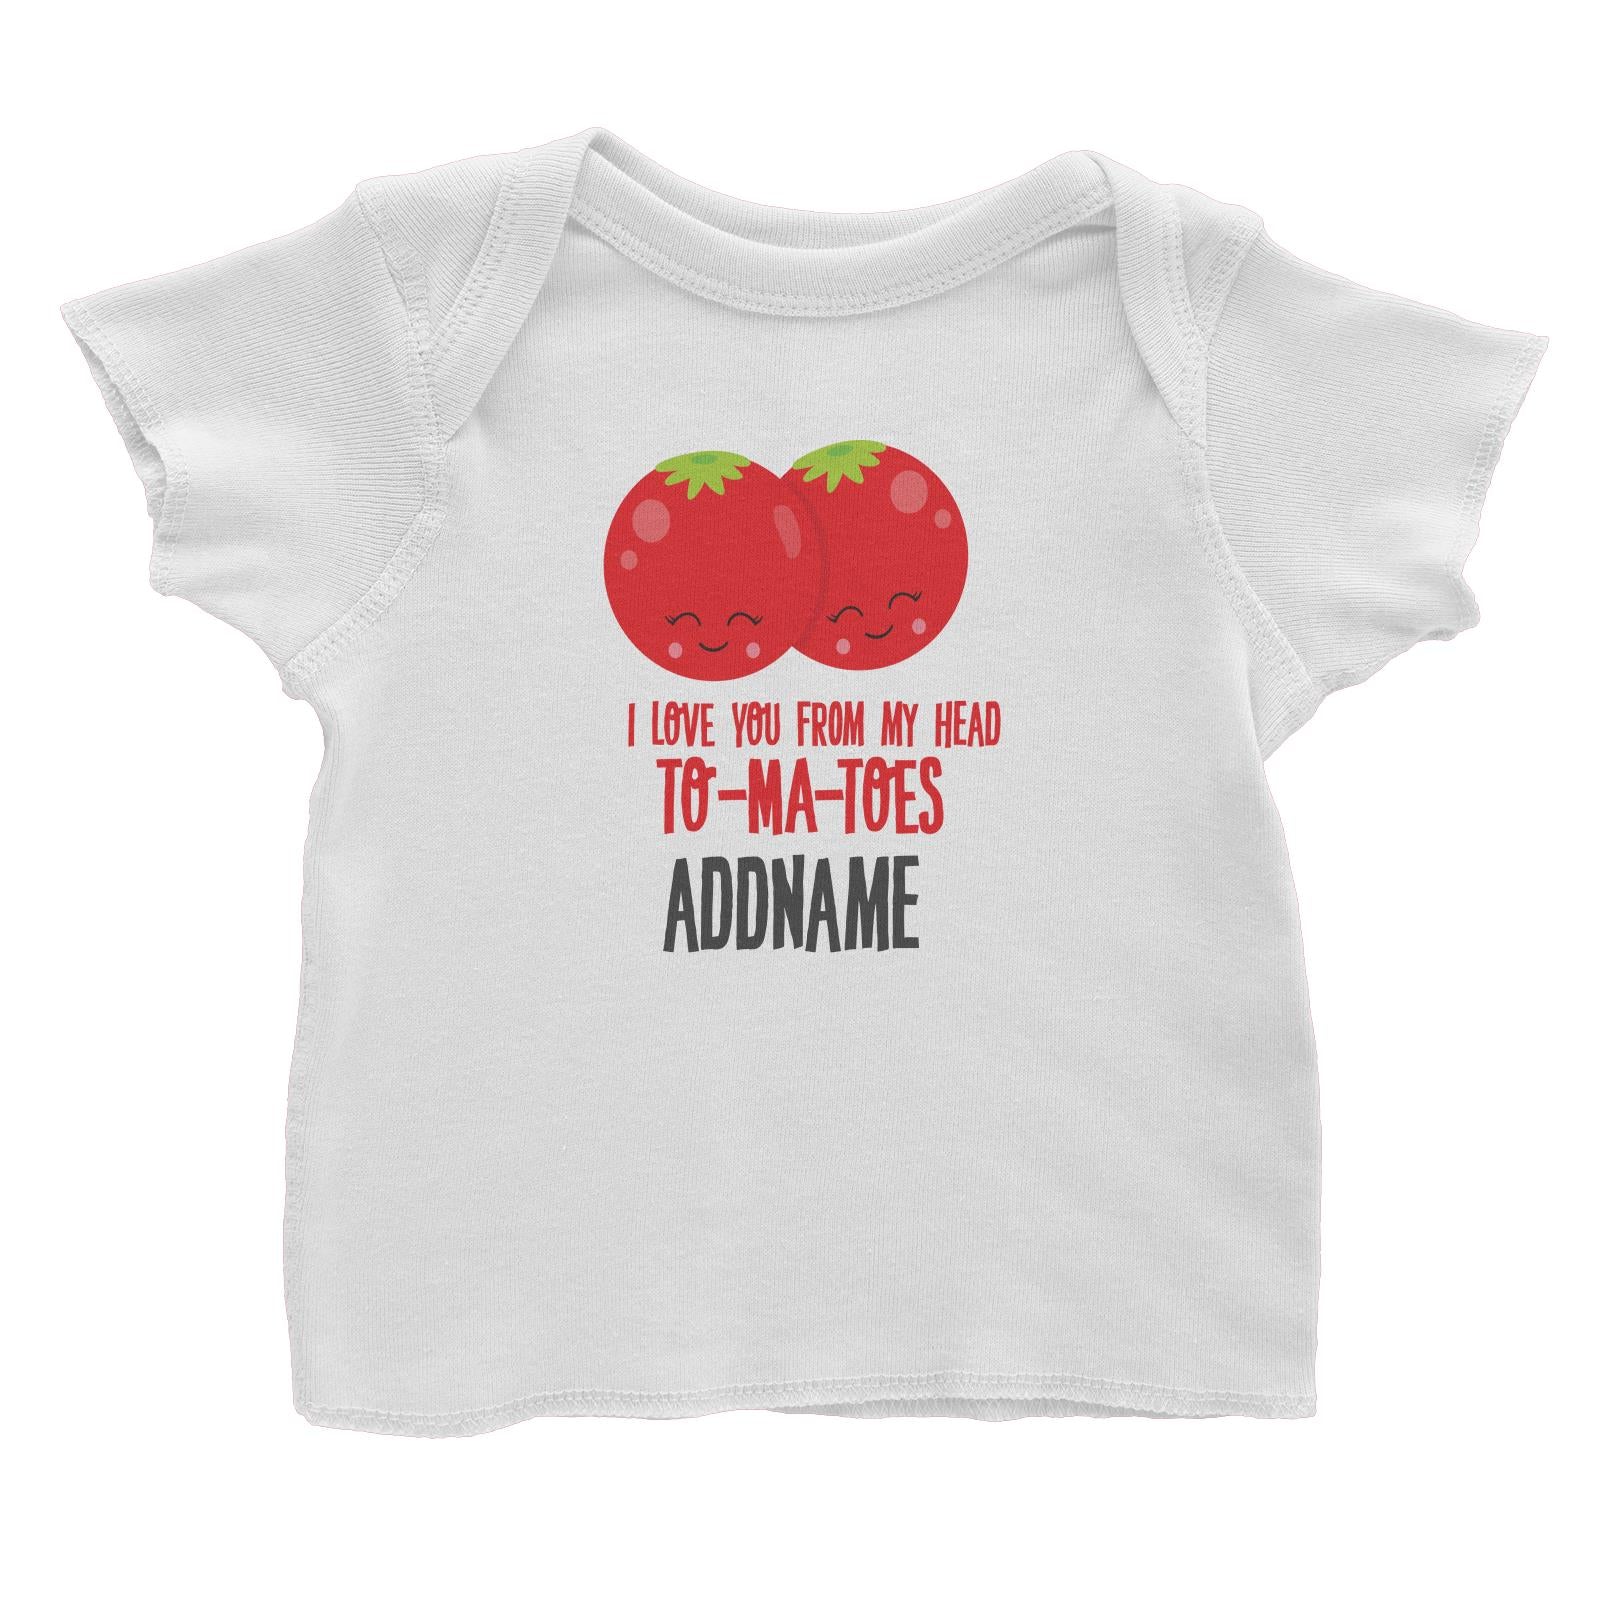 Love Food Puns I Love You From My Head TOMATOES Addname Baby T-Shirt